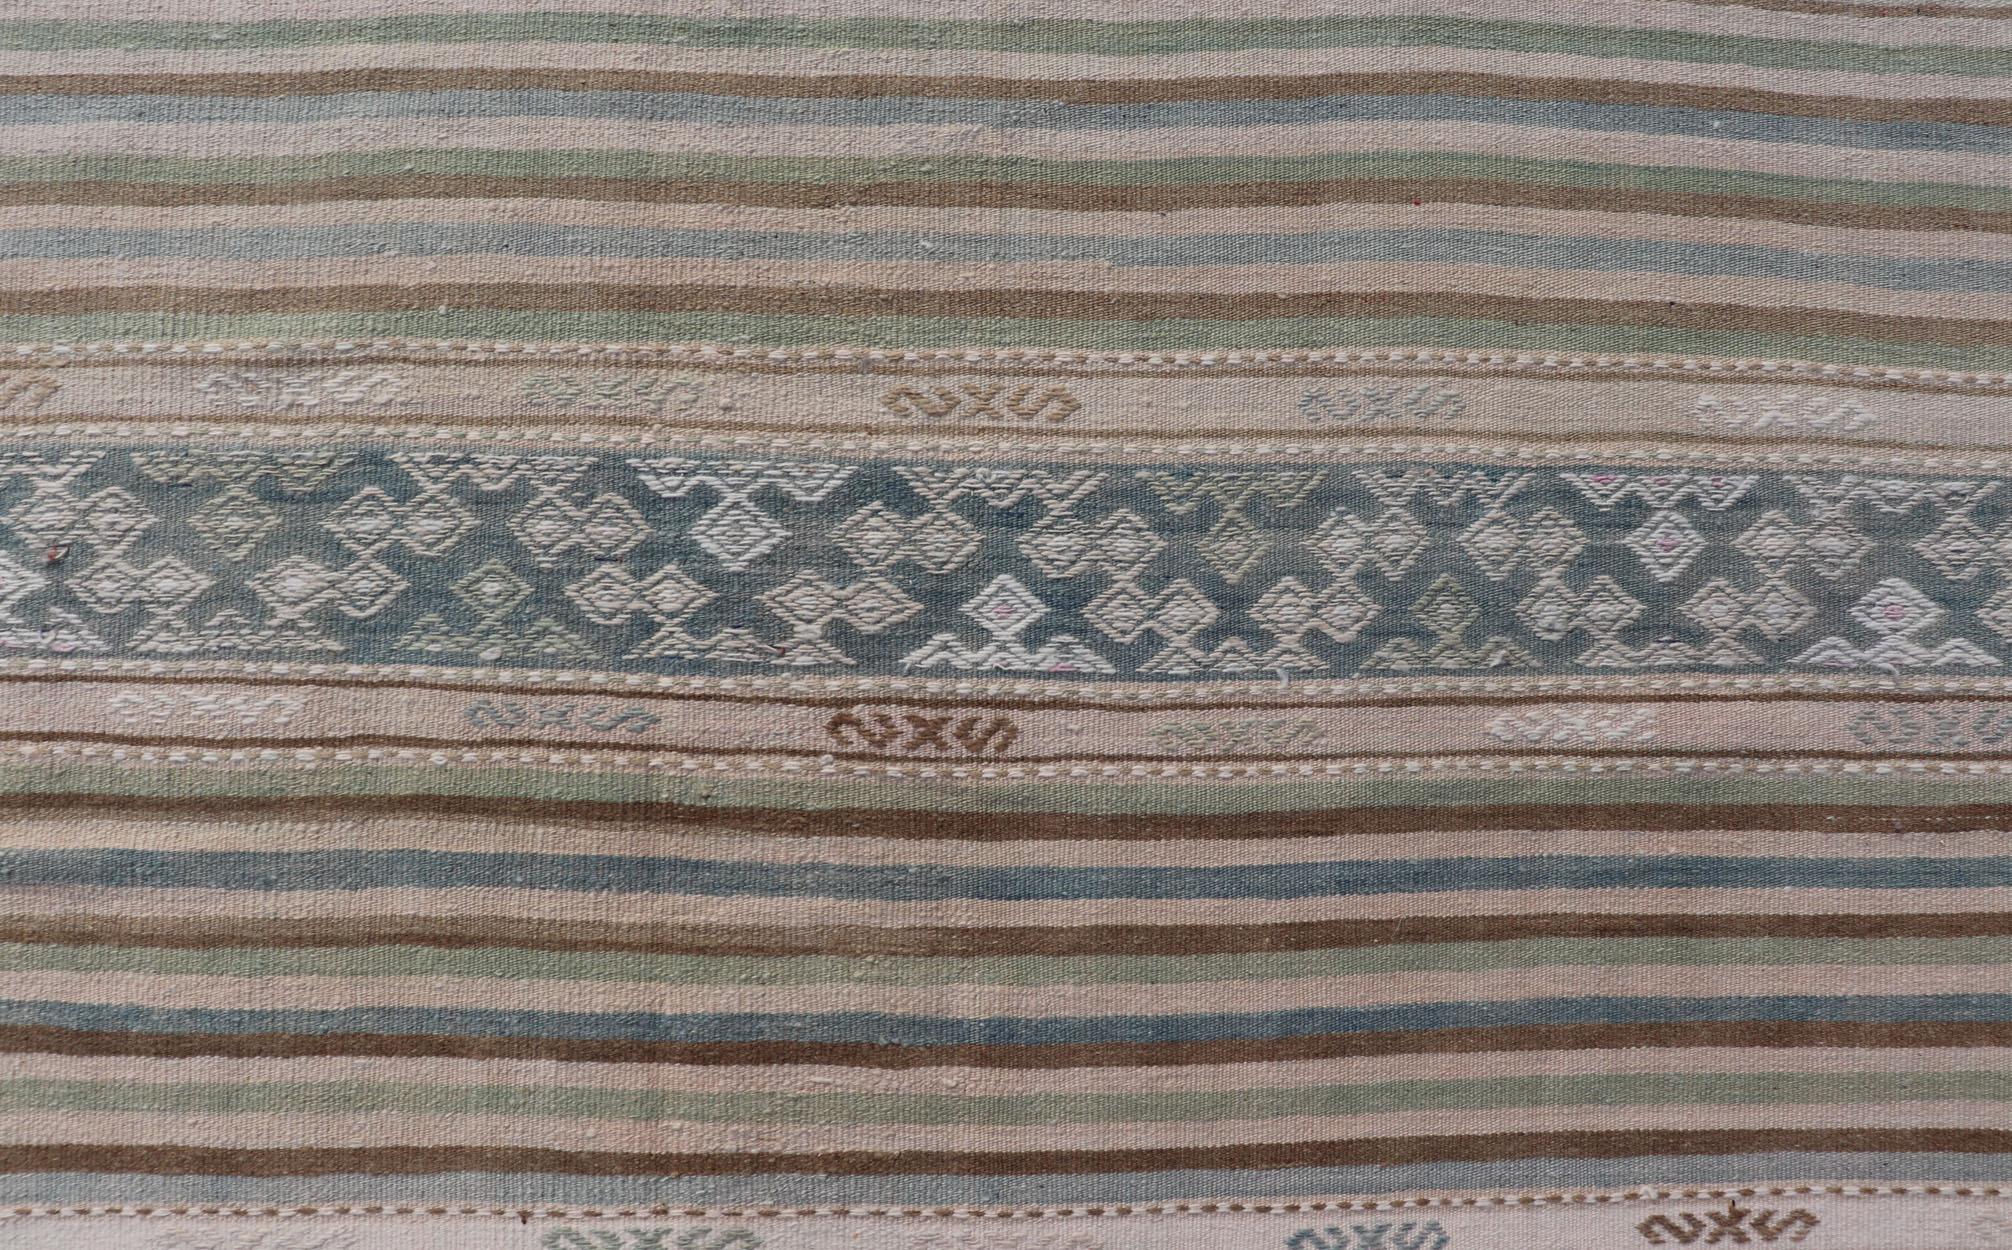 Hand-Knotted Turkish Flat-Weave Kilim with Stripes and Embroideries In Blue, Green, and Cream For Sale